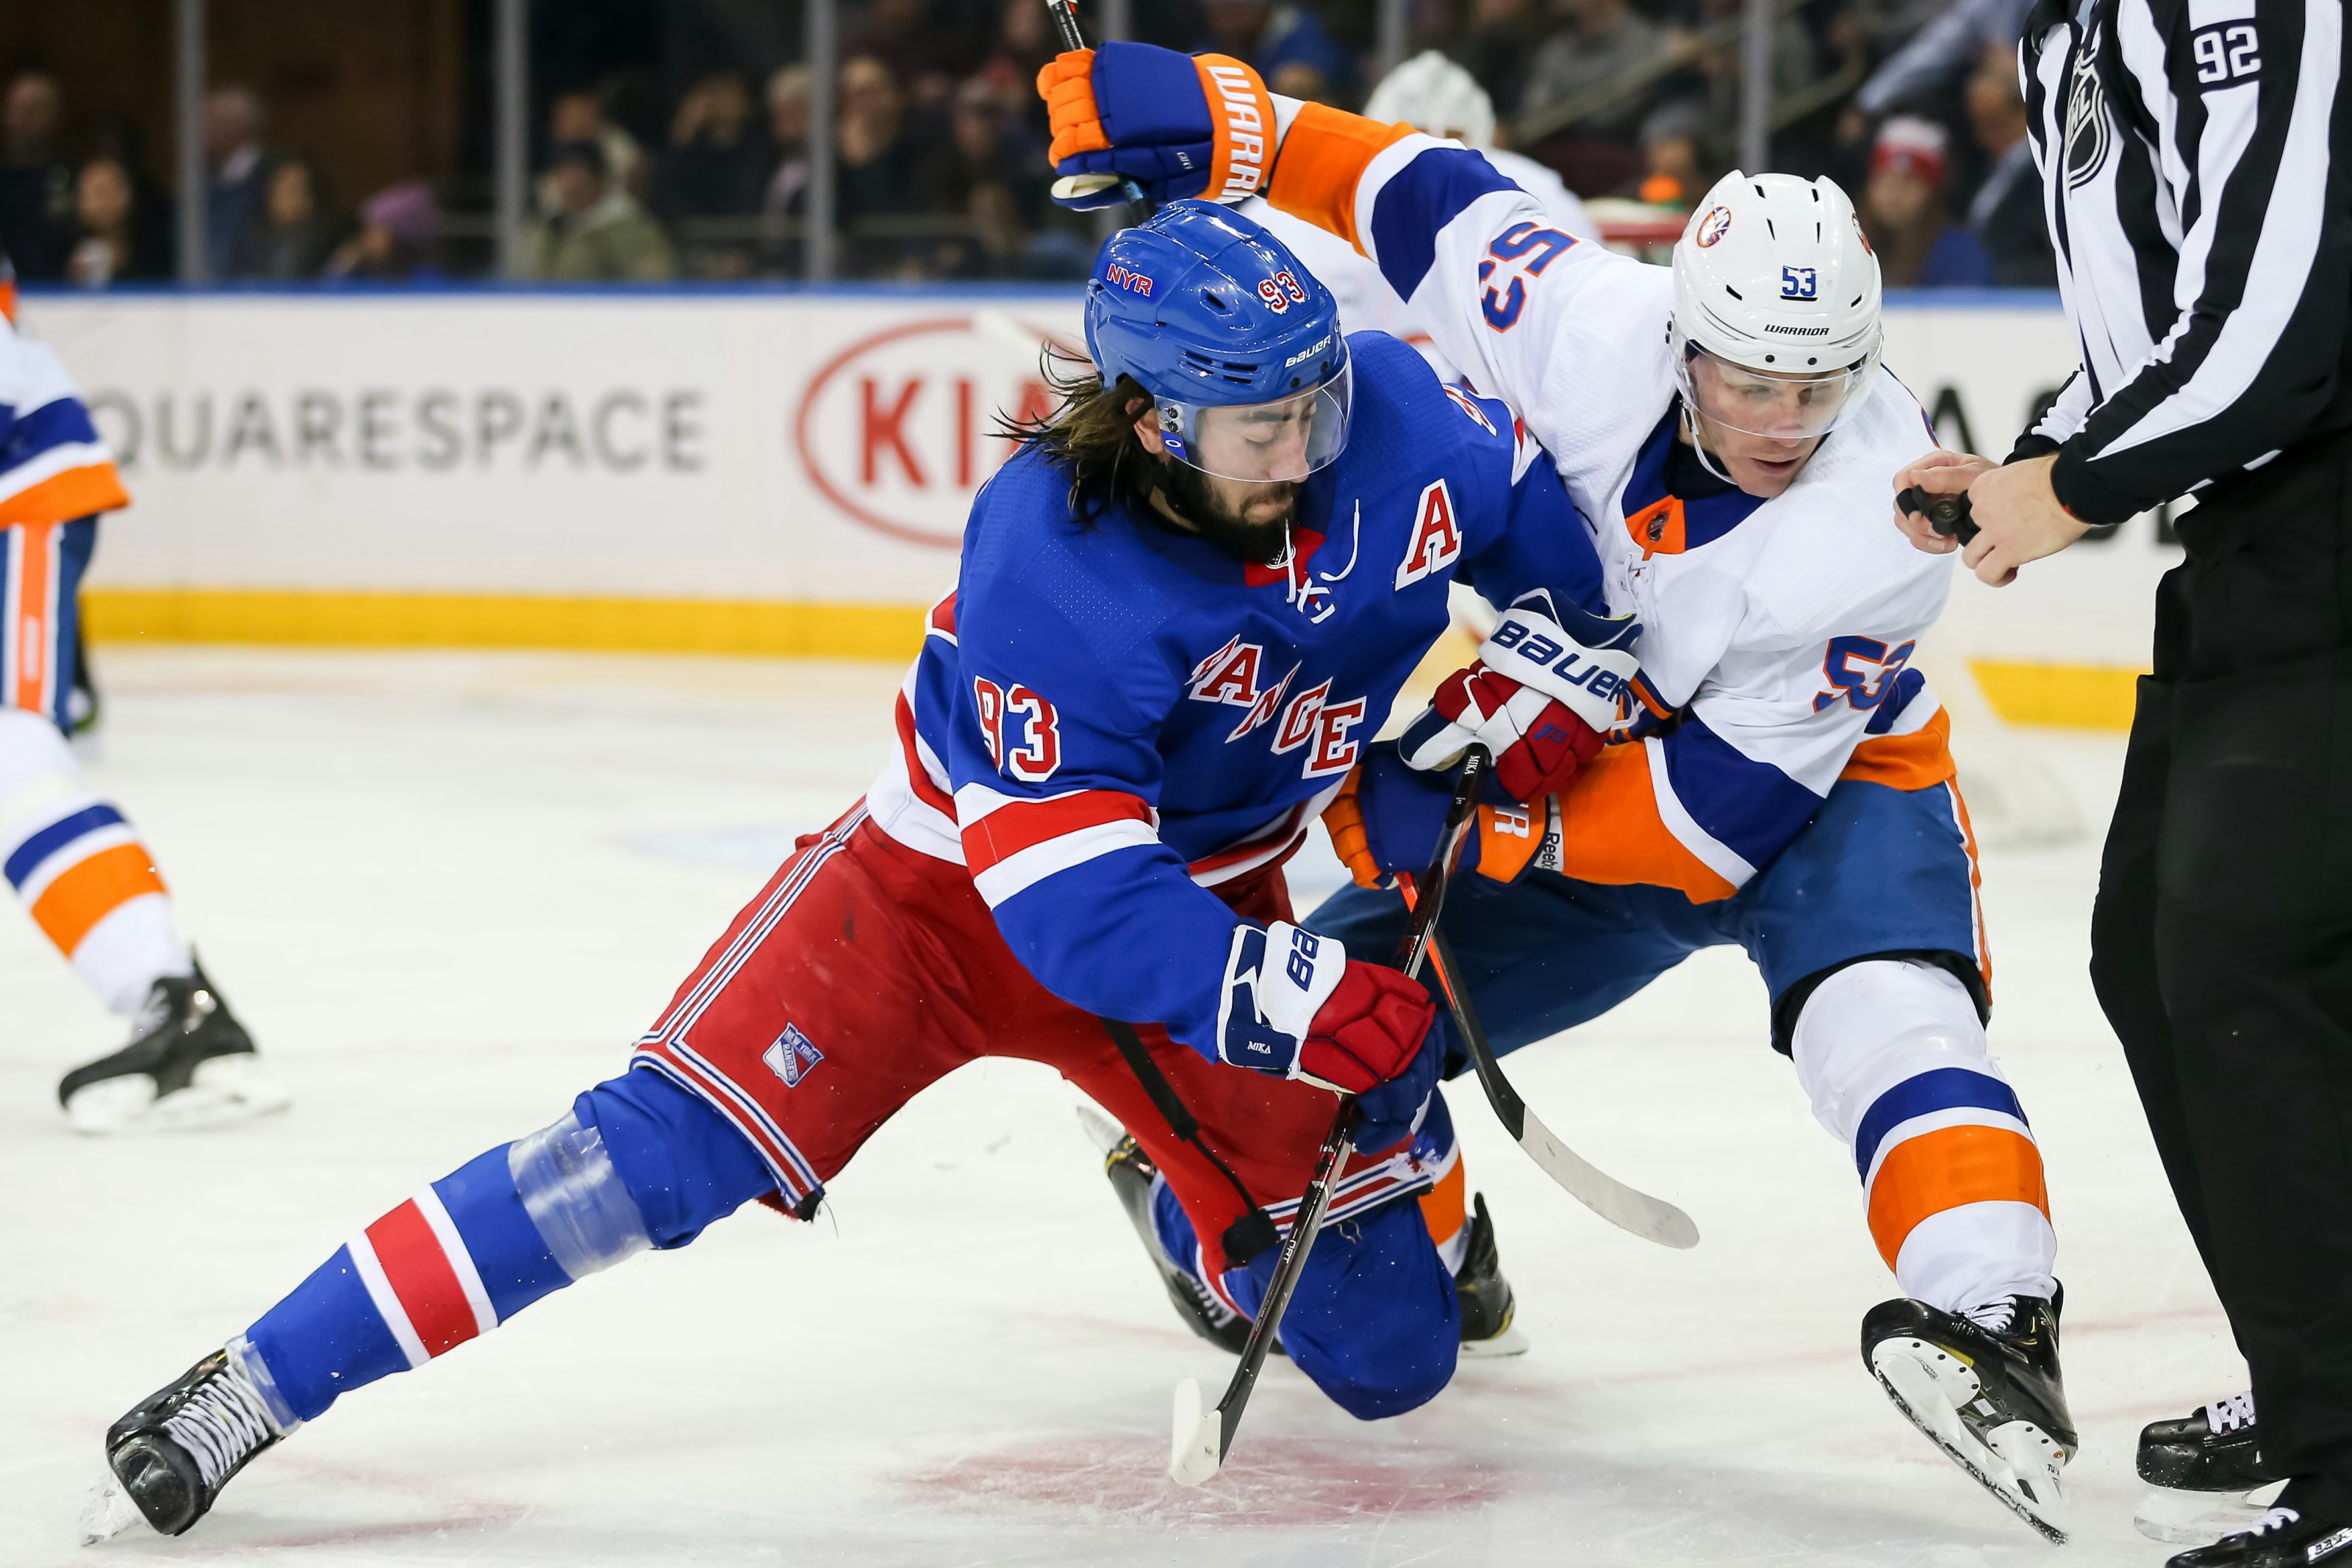 New York Rangers or New Jersey Devils: Who had the better offseason?